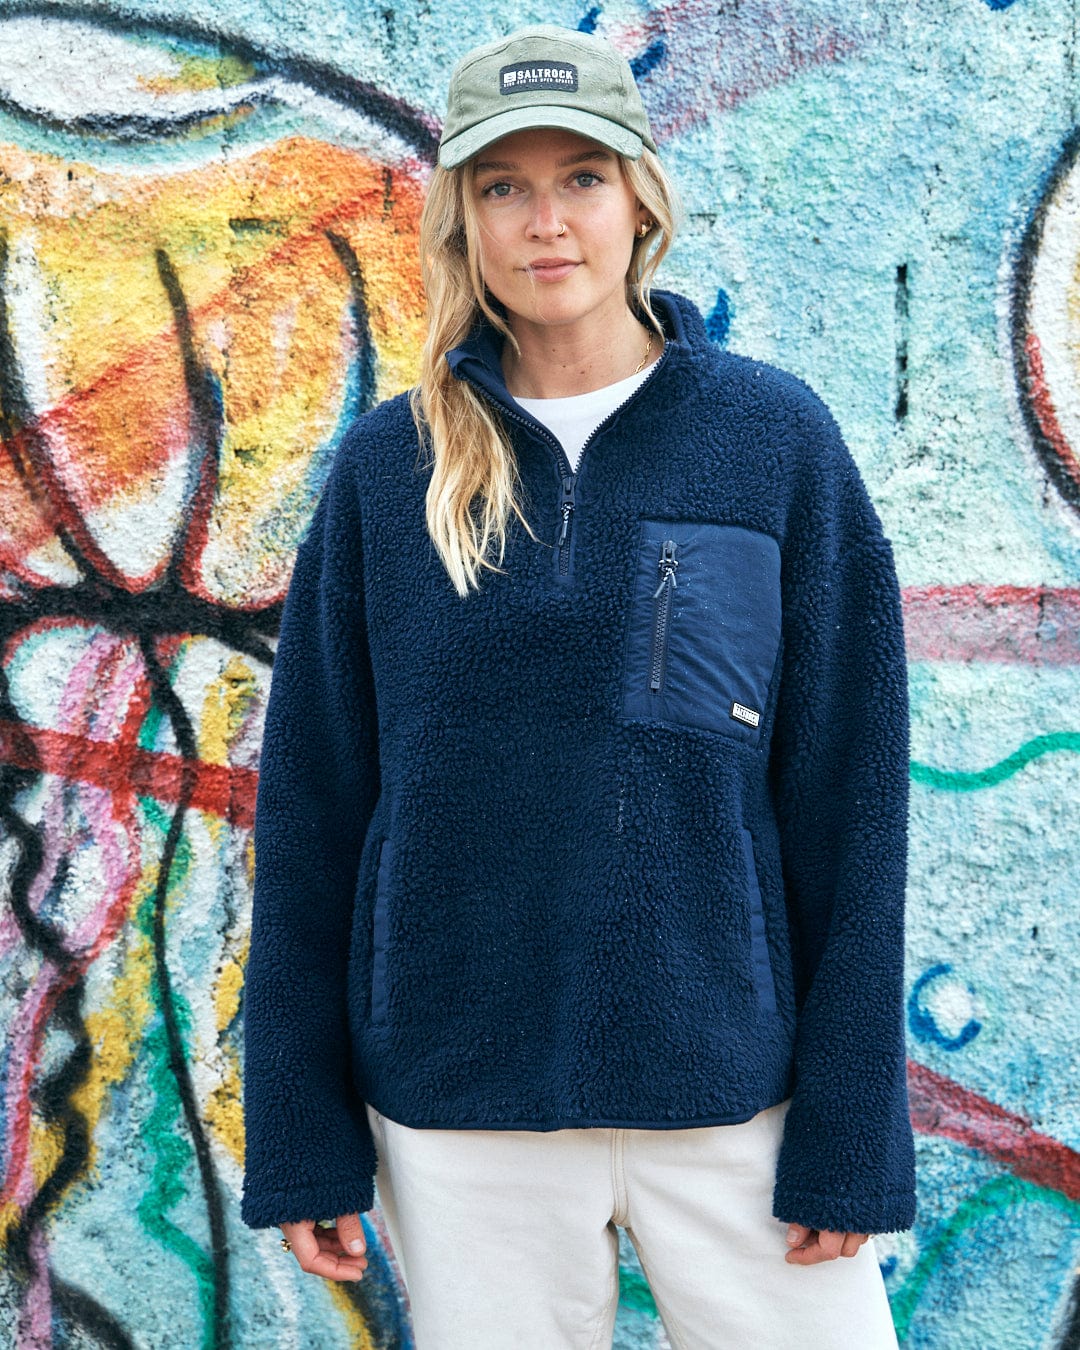 A woman wearing a Saltrock-branded fleece jacket and a Gaitor 5 Panel UPF Cap - Green stands in front of a graffiti-covered wall.